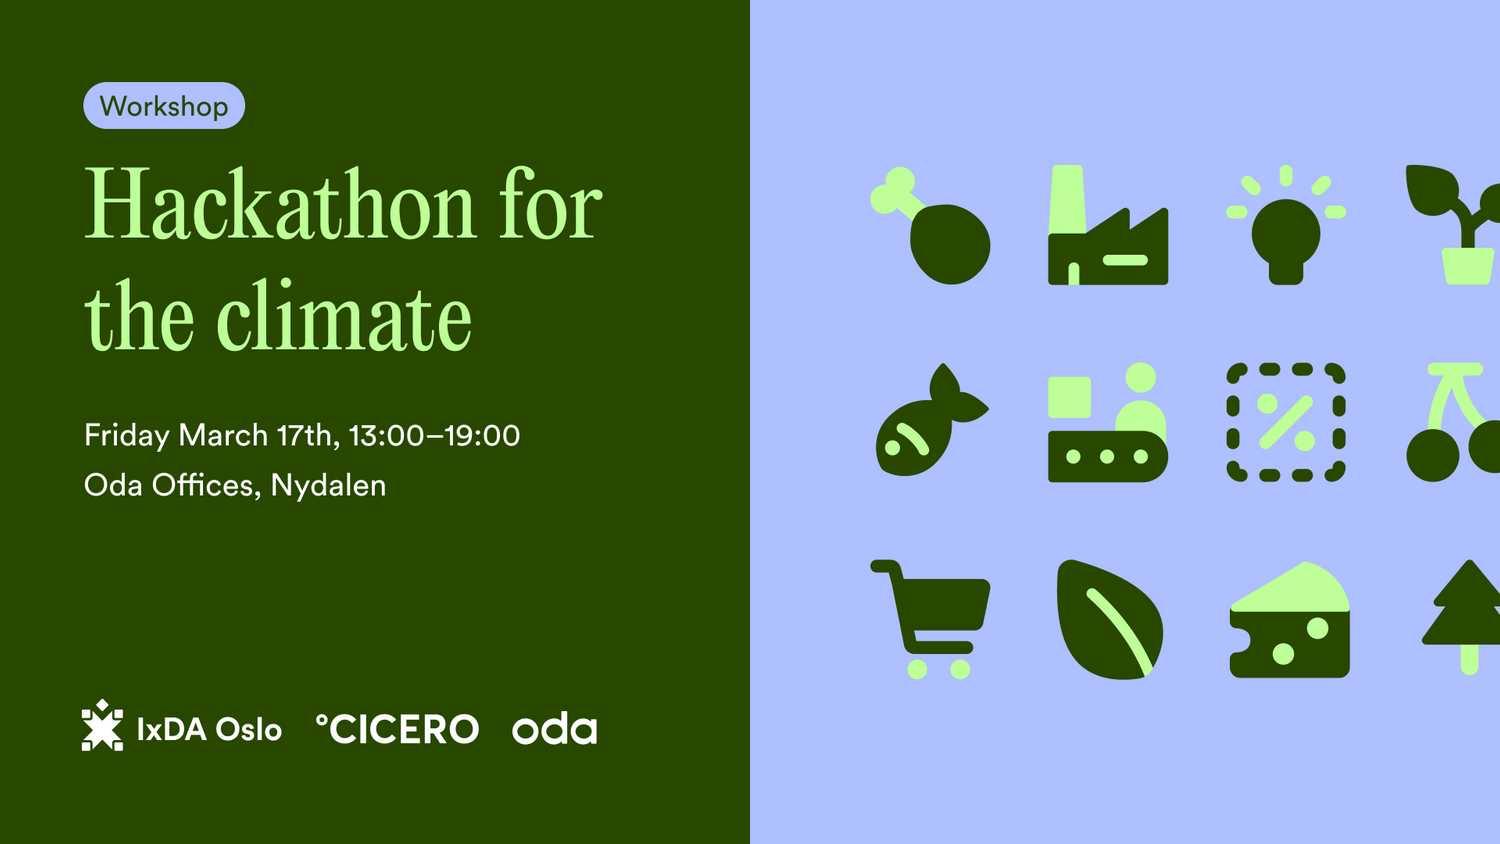 Hackathon for the climate at Oda's offices in Nydalen. Friday 17 March from 13:00 to 19:00